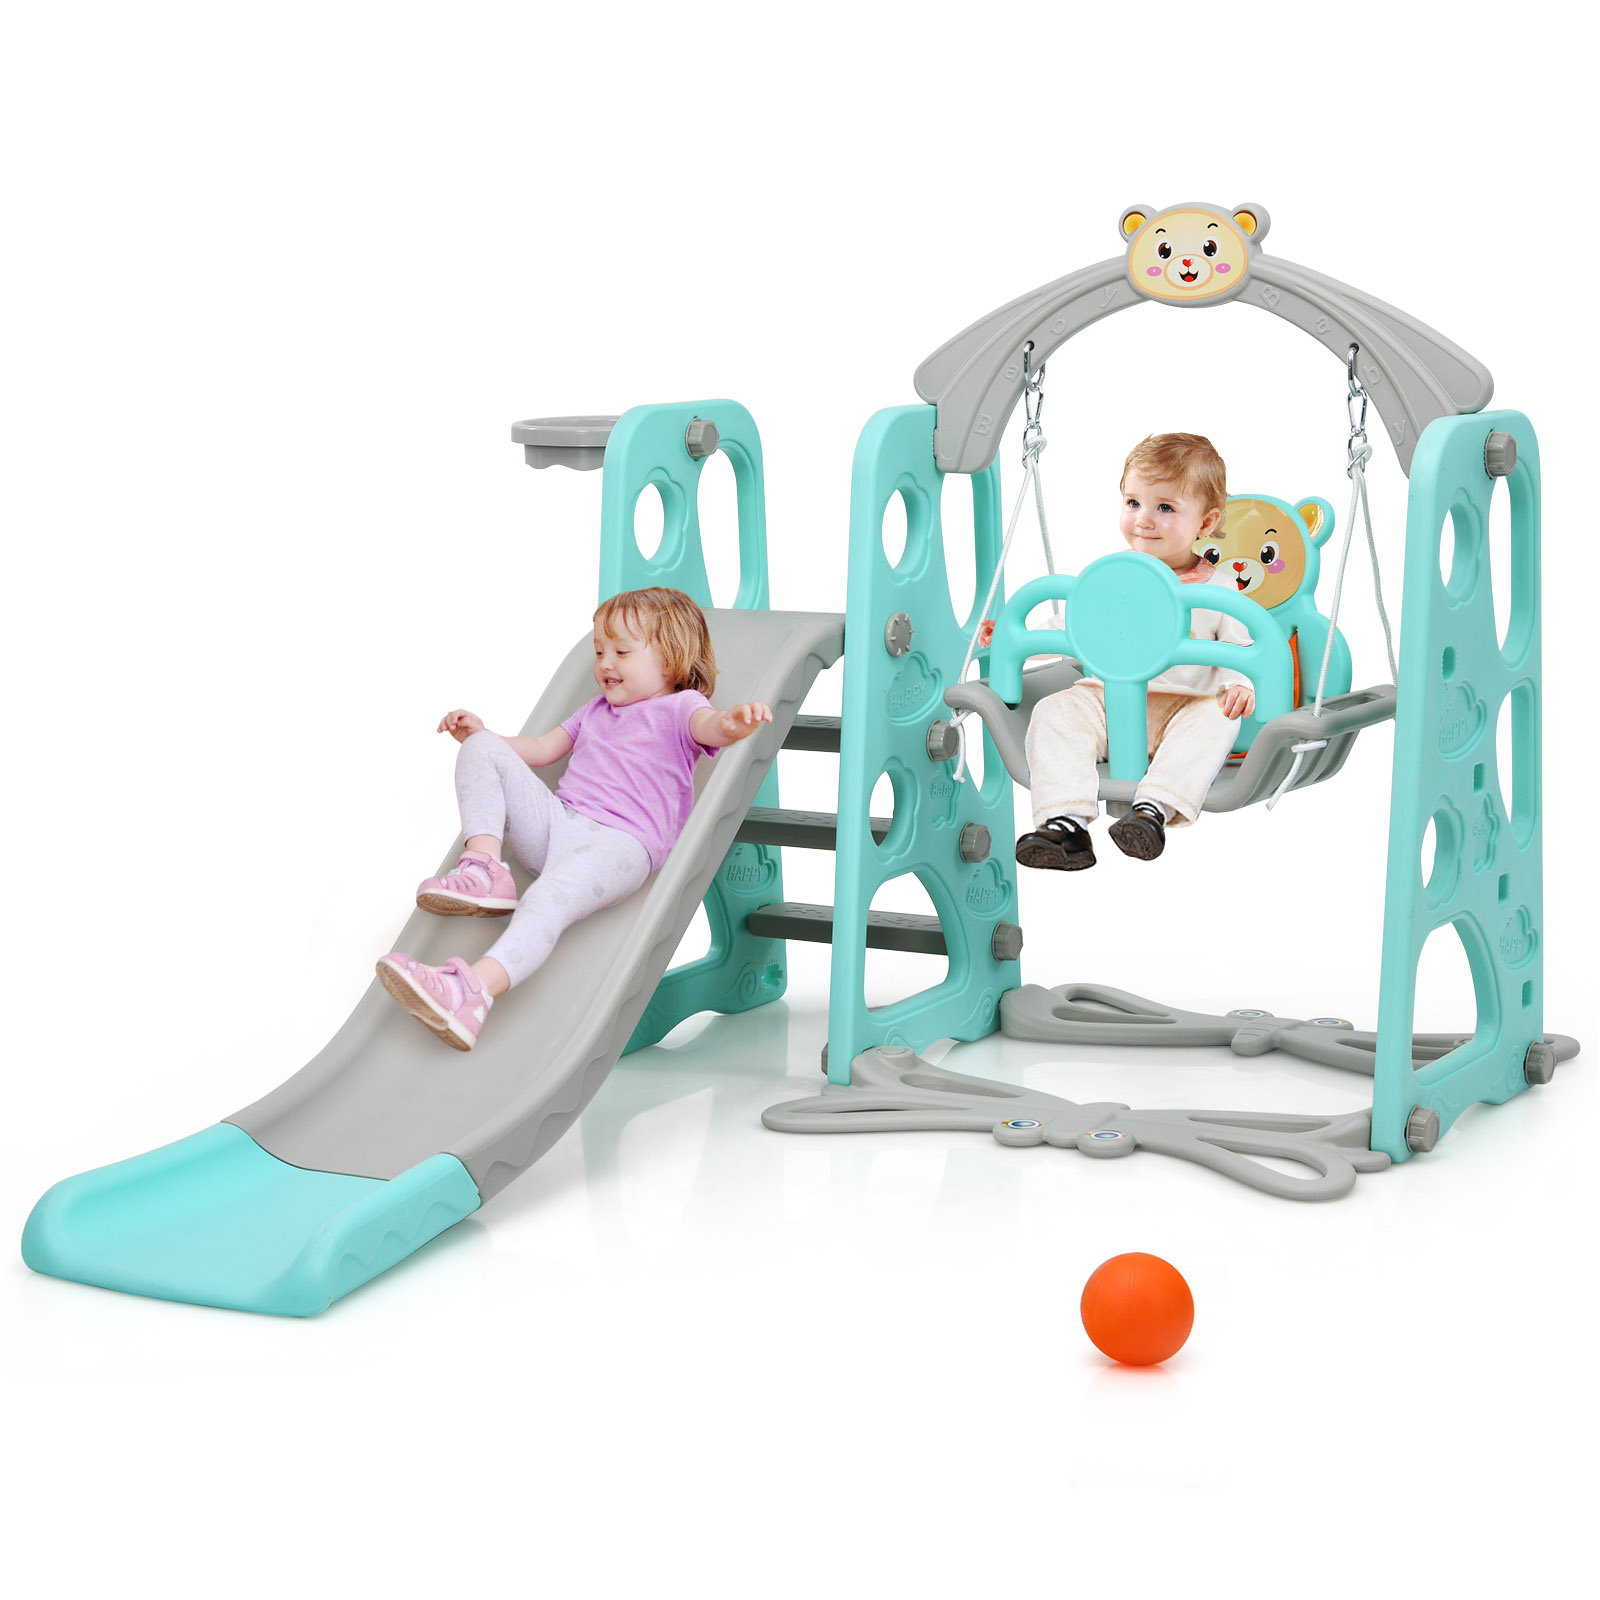 Babyjoy 4-in-1 Toddler Climber and Swing Set w/ Basketball Hoop & Ball Green - image 1 of 10